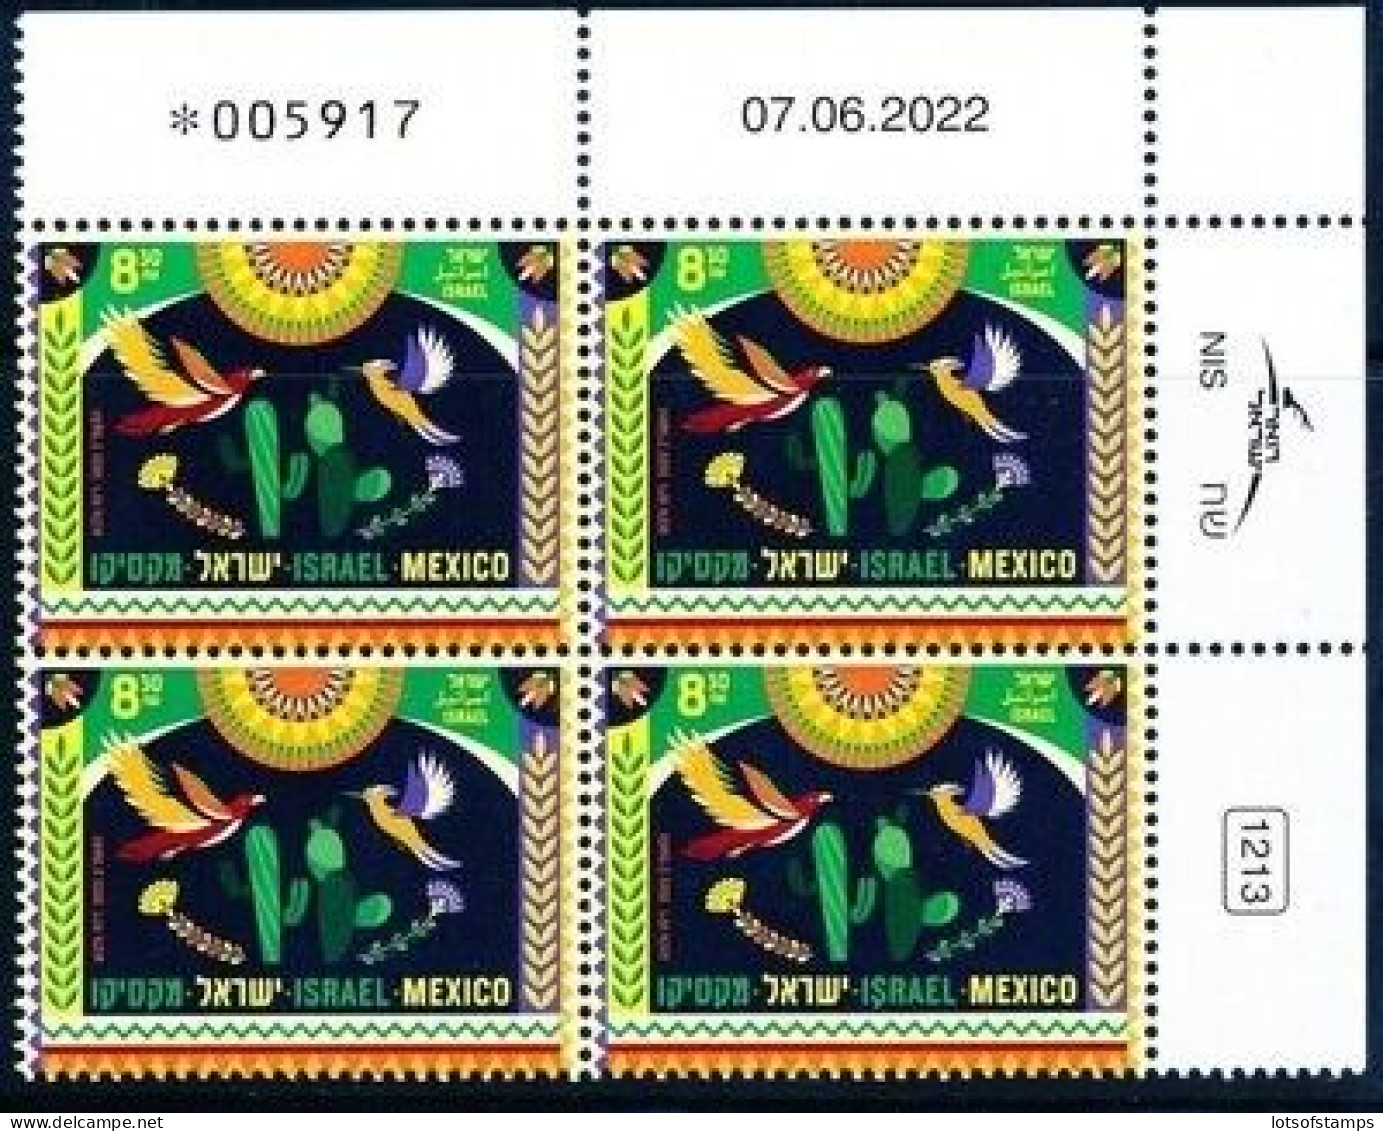 ISRAEL 2022 JOINT ISSUE W/MEXICO 70 YEARS DIPLOMATIC RELATIONS PLATE BLOCK MNH - Gebraucht